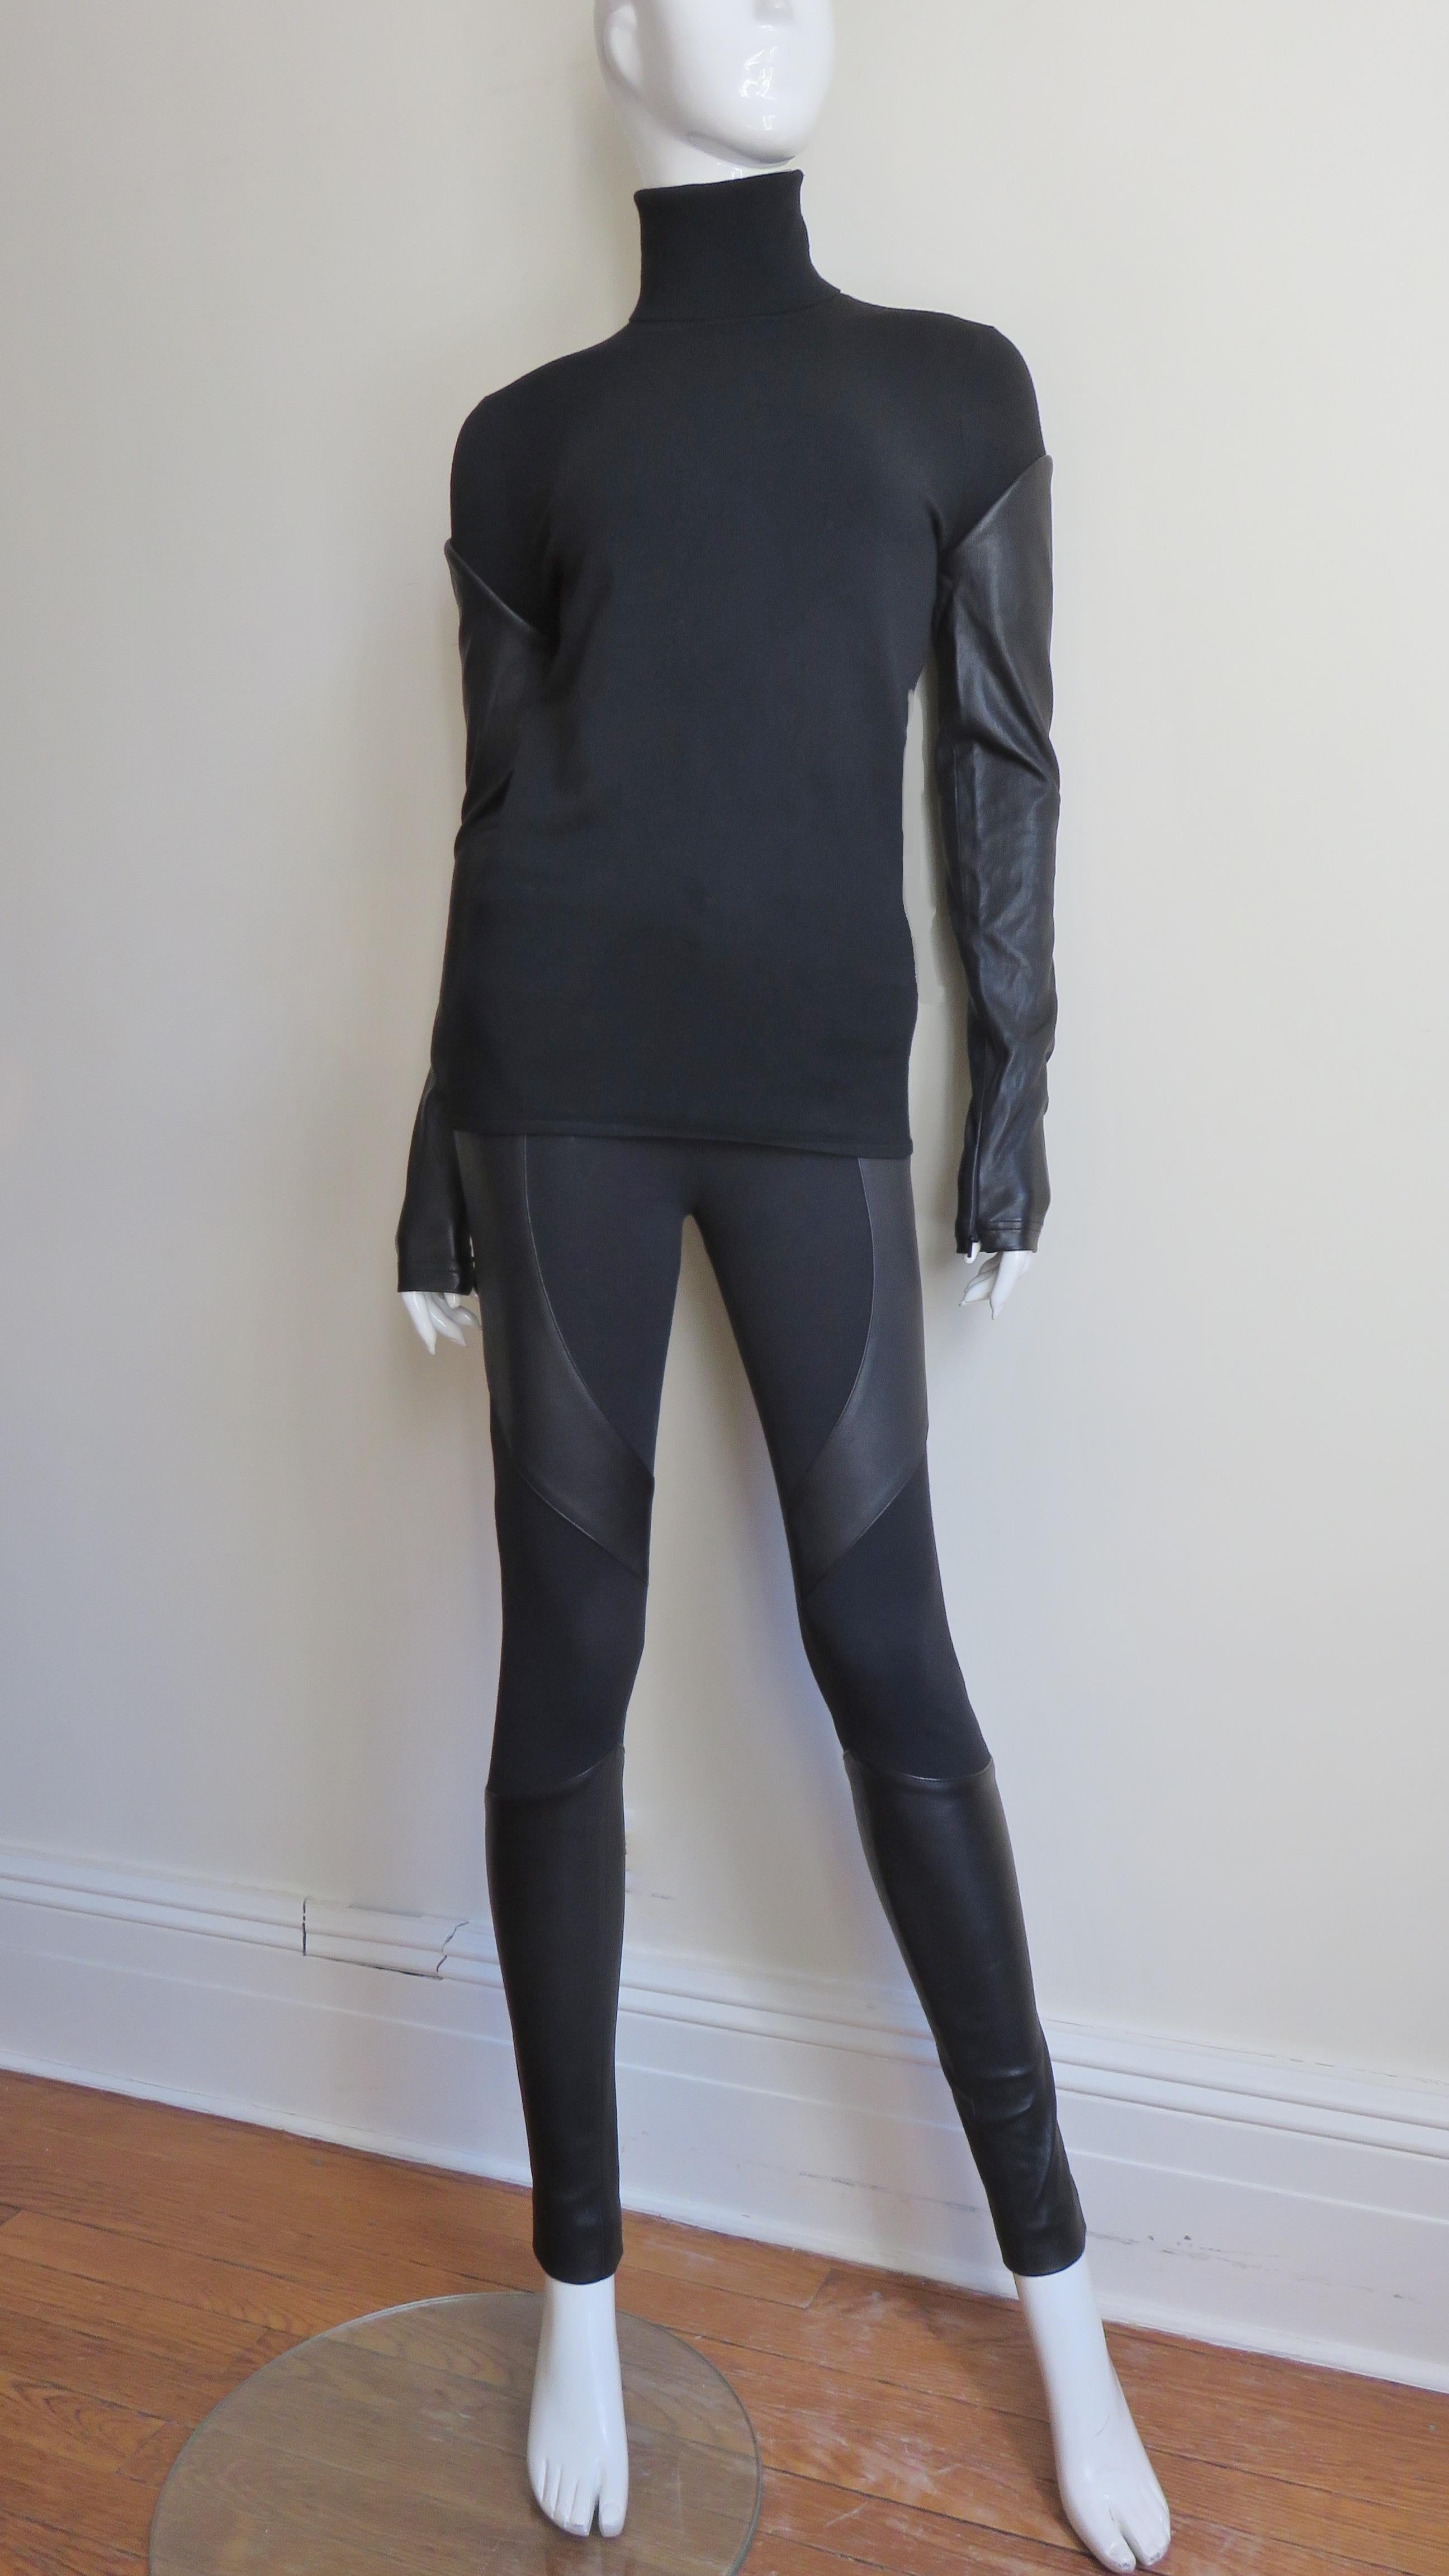 A fabulous black knit and leather 2 piece pant and top set from Givenchy.  It consists of a turtleneck top with long leather sleeves with zipper cuffs.  The pants have a zipper front, mid rise waistband, 2 front pockets and insets of leather at the